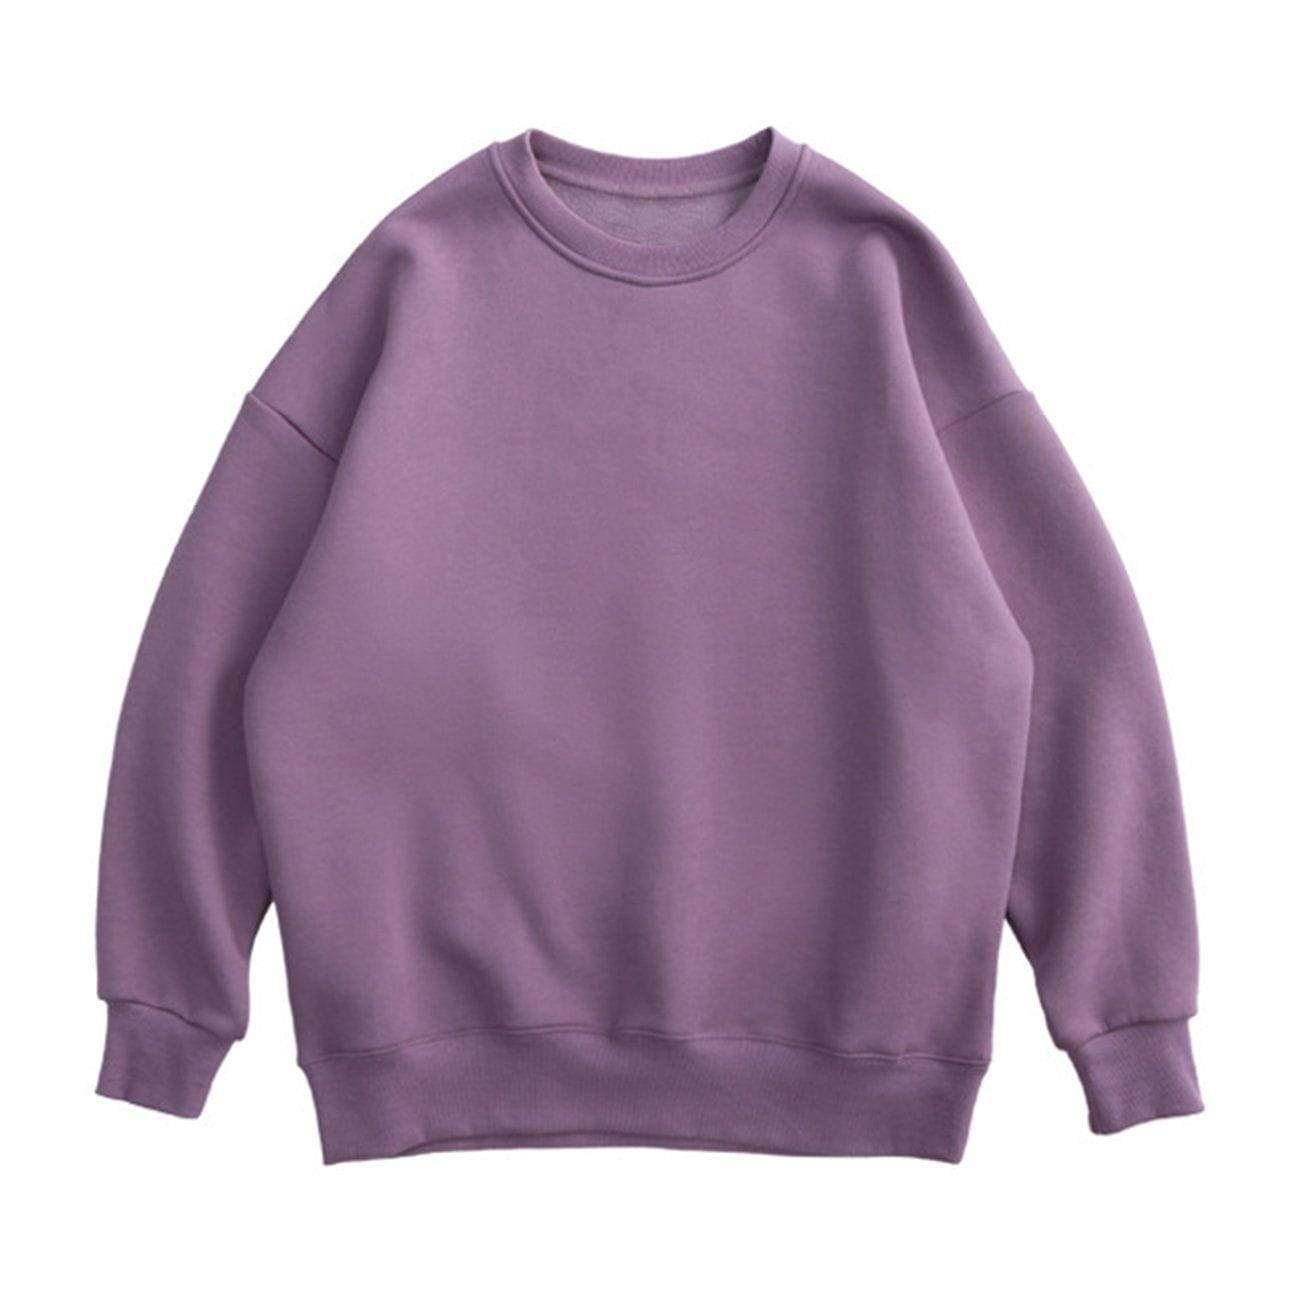 LUXENFY™ - "Candy Color" Sweatshirt luxenfy.com